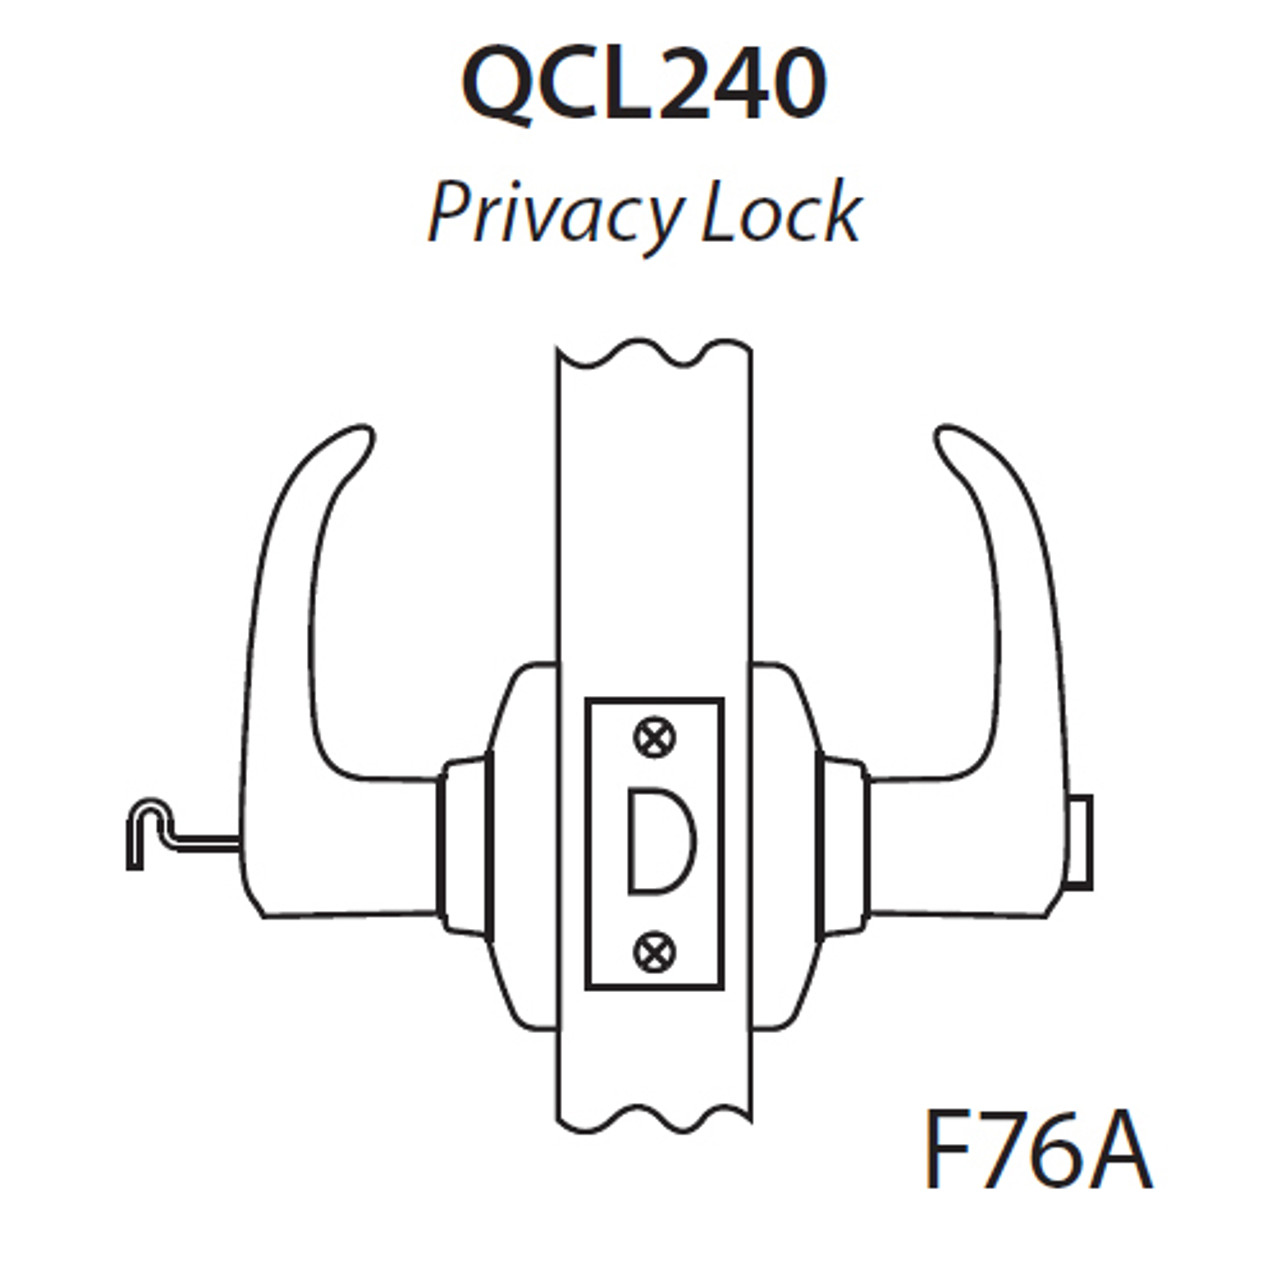 QCL240M613NR4NOS Stanley QCL200 Series Cylindrical Privacy Lock with Summit Lever in Oil Rubbed Bronze